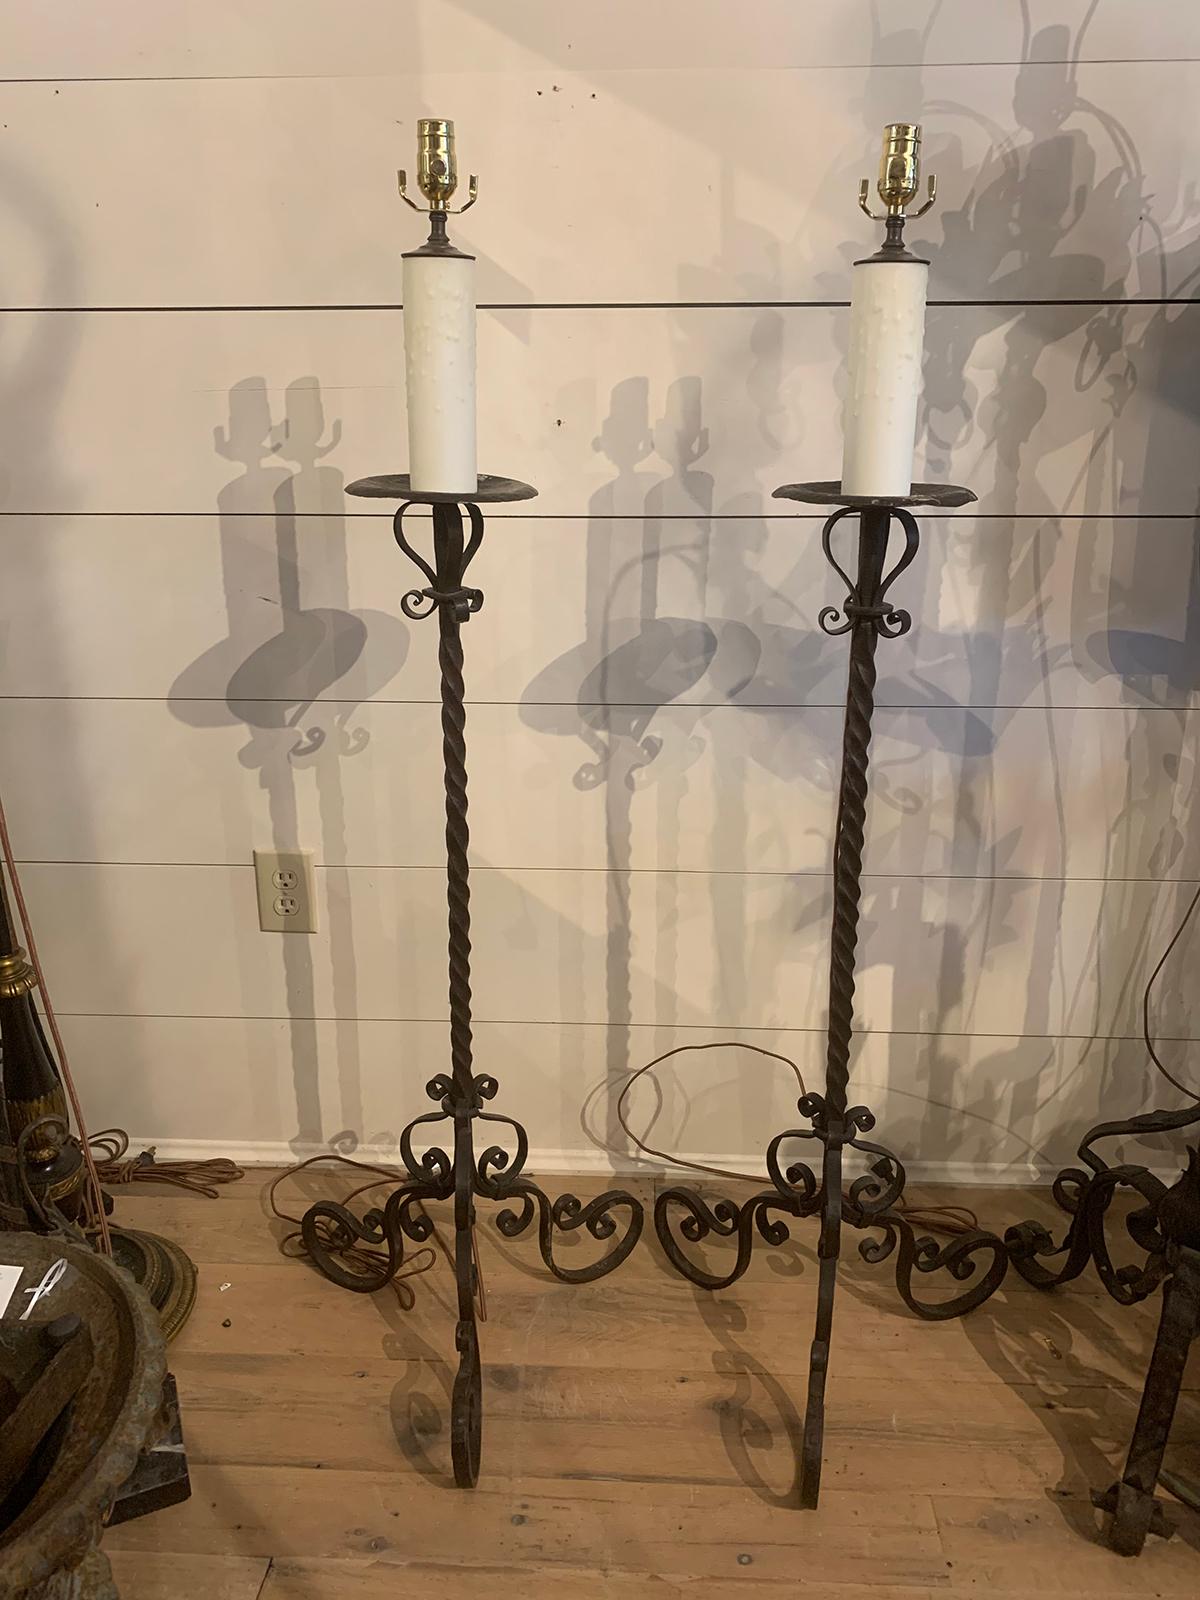 Pair of early 20th century iron floor lamps
New wiring